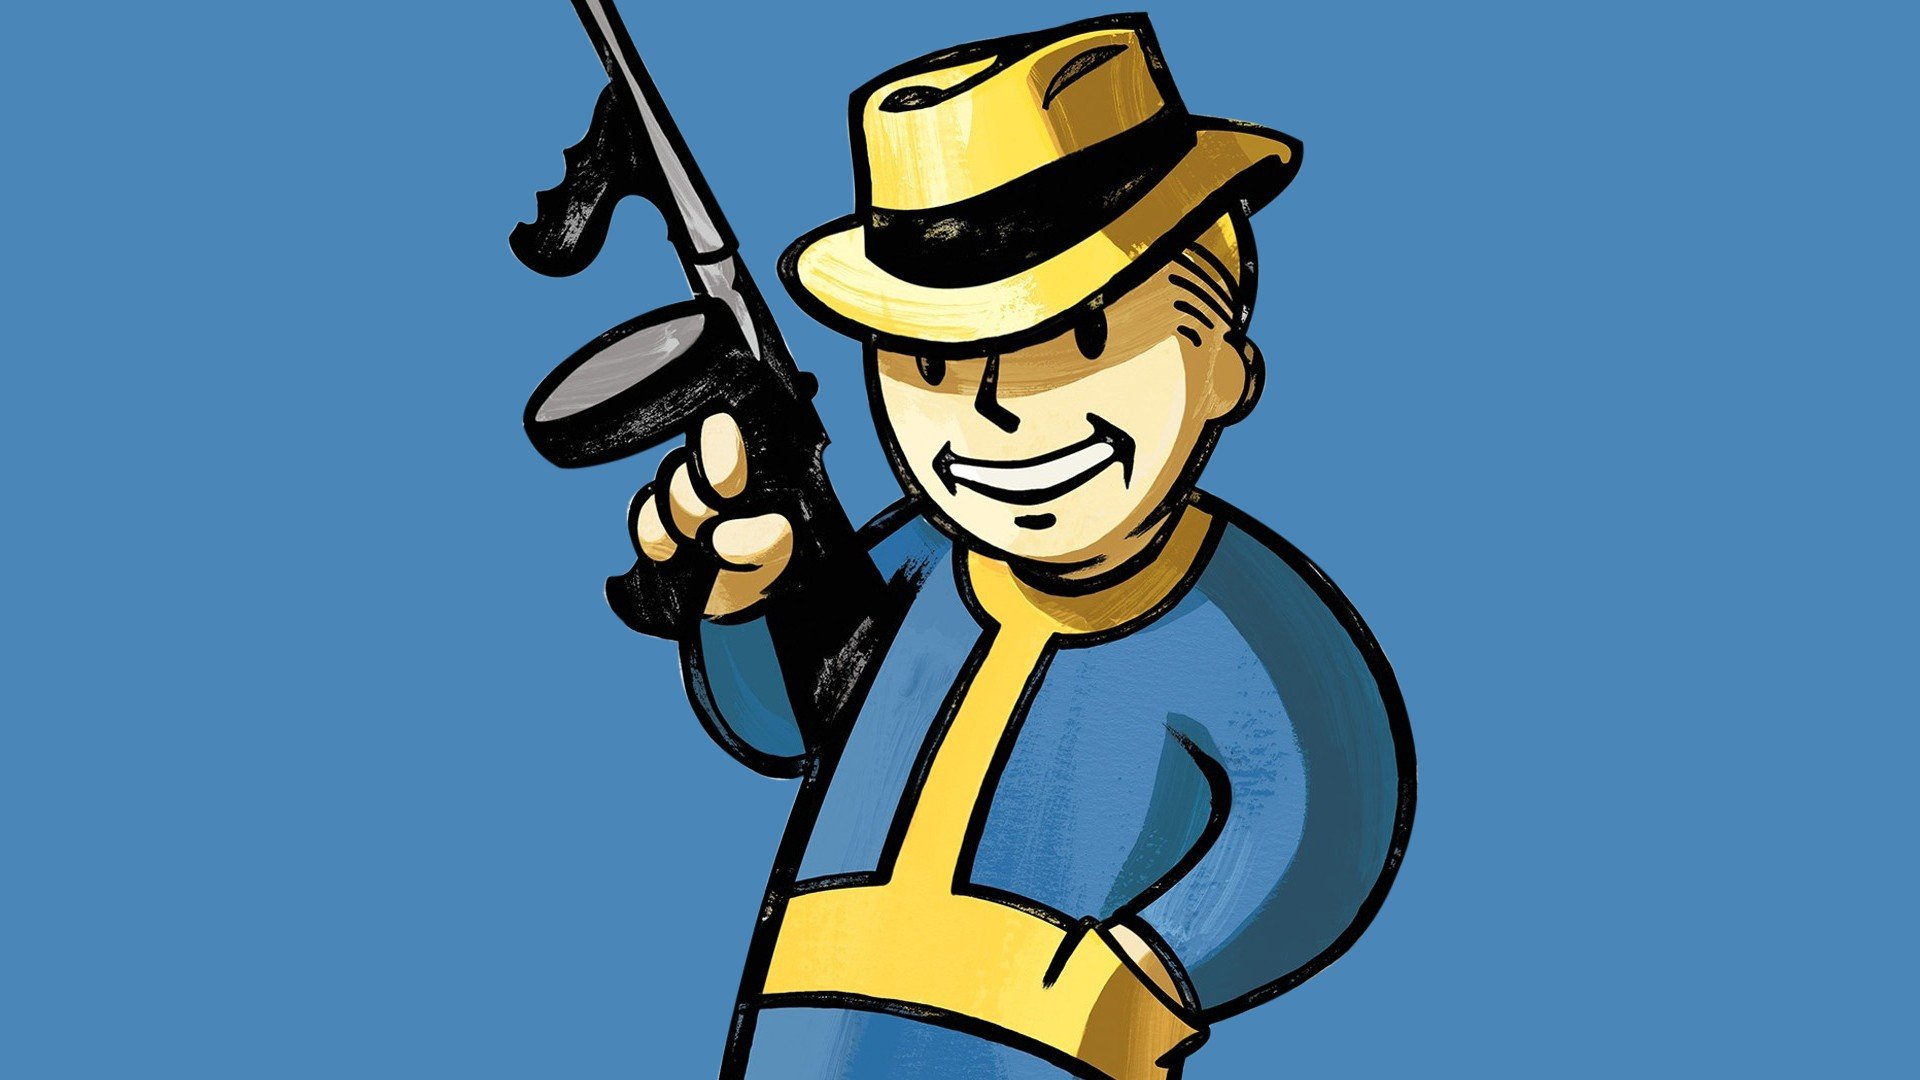 Video Games Minimalistic Fallout Bethesda Softworks Pip Boy Role Playing Game Wallpapers Hd Desktop And Mobile Backgrounds